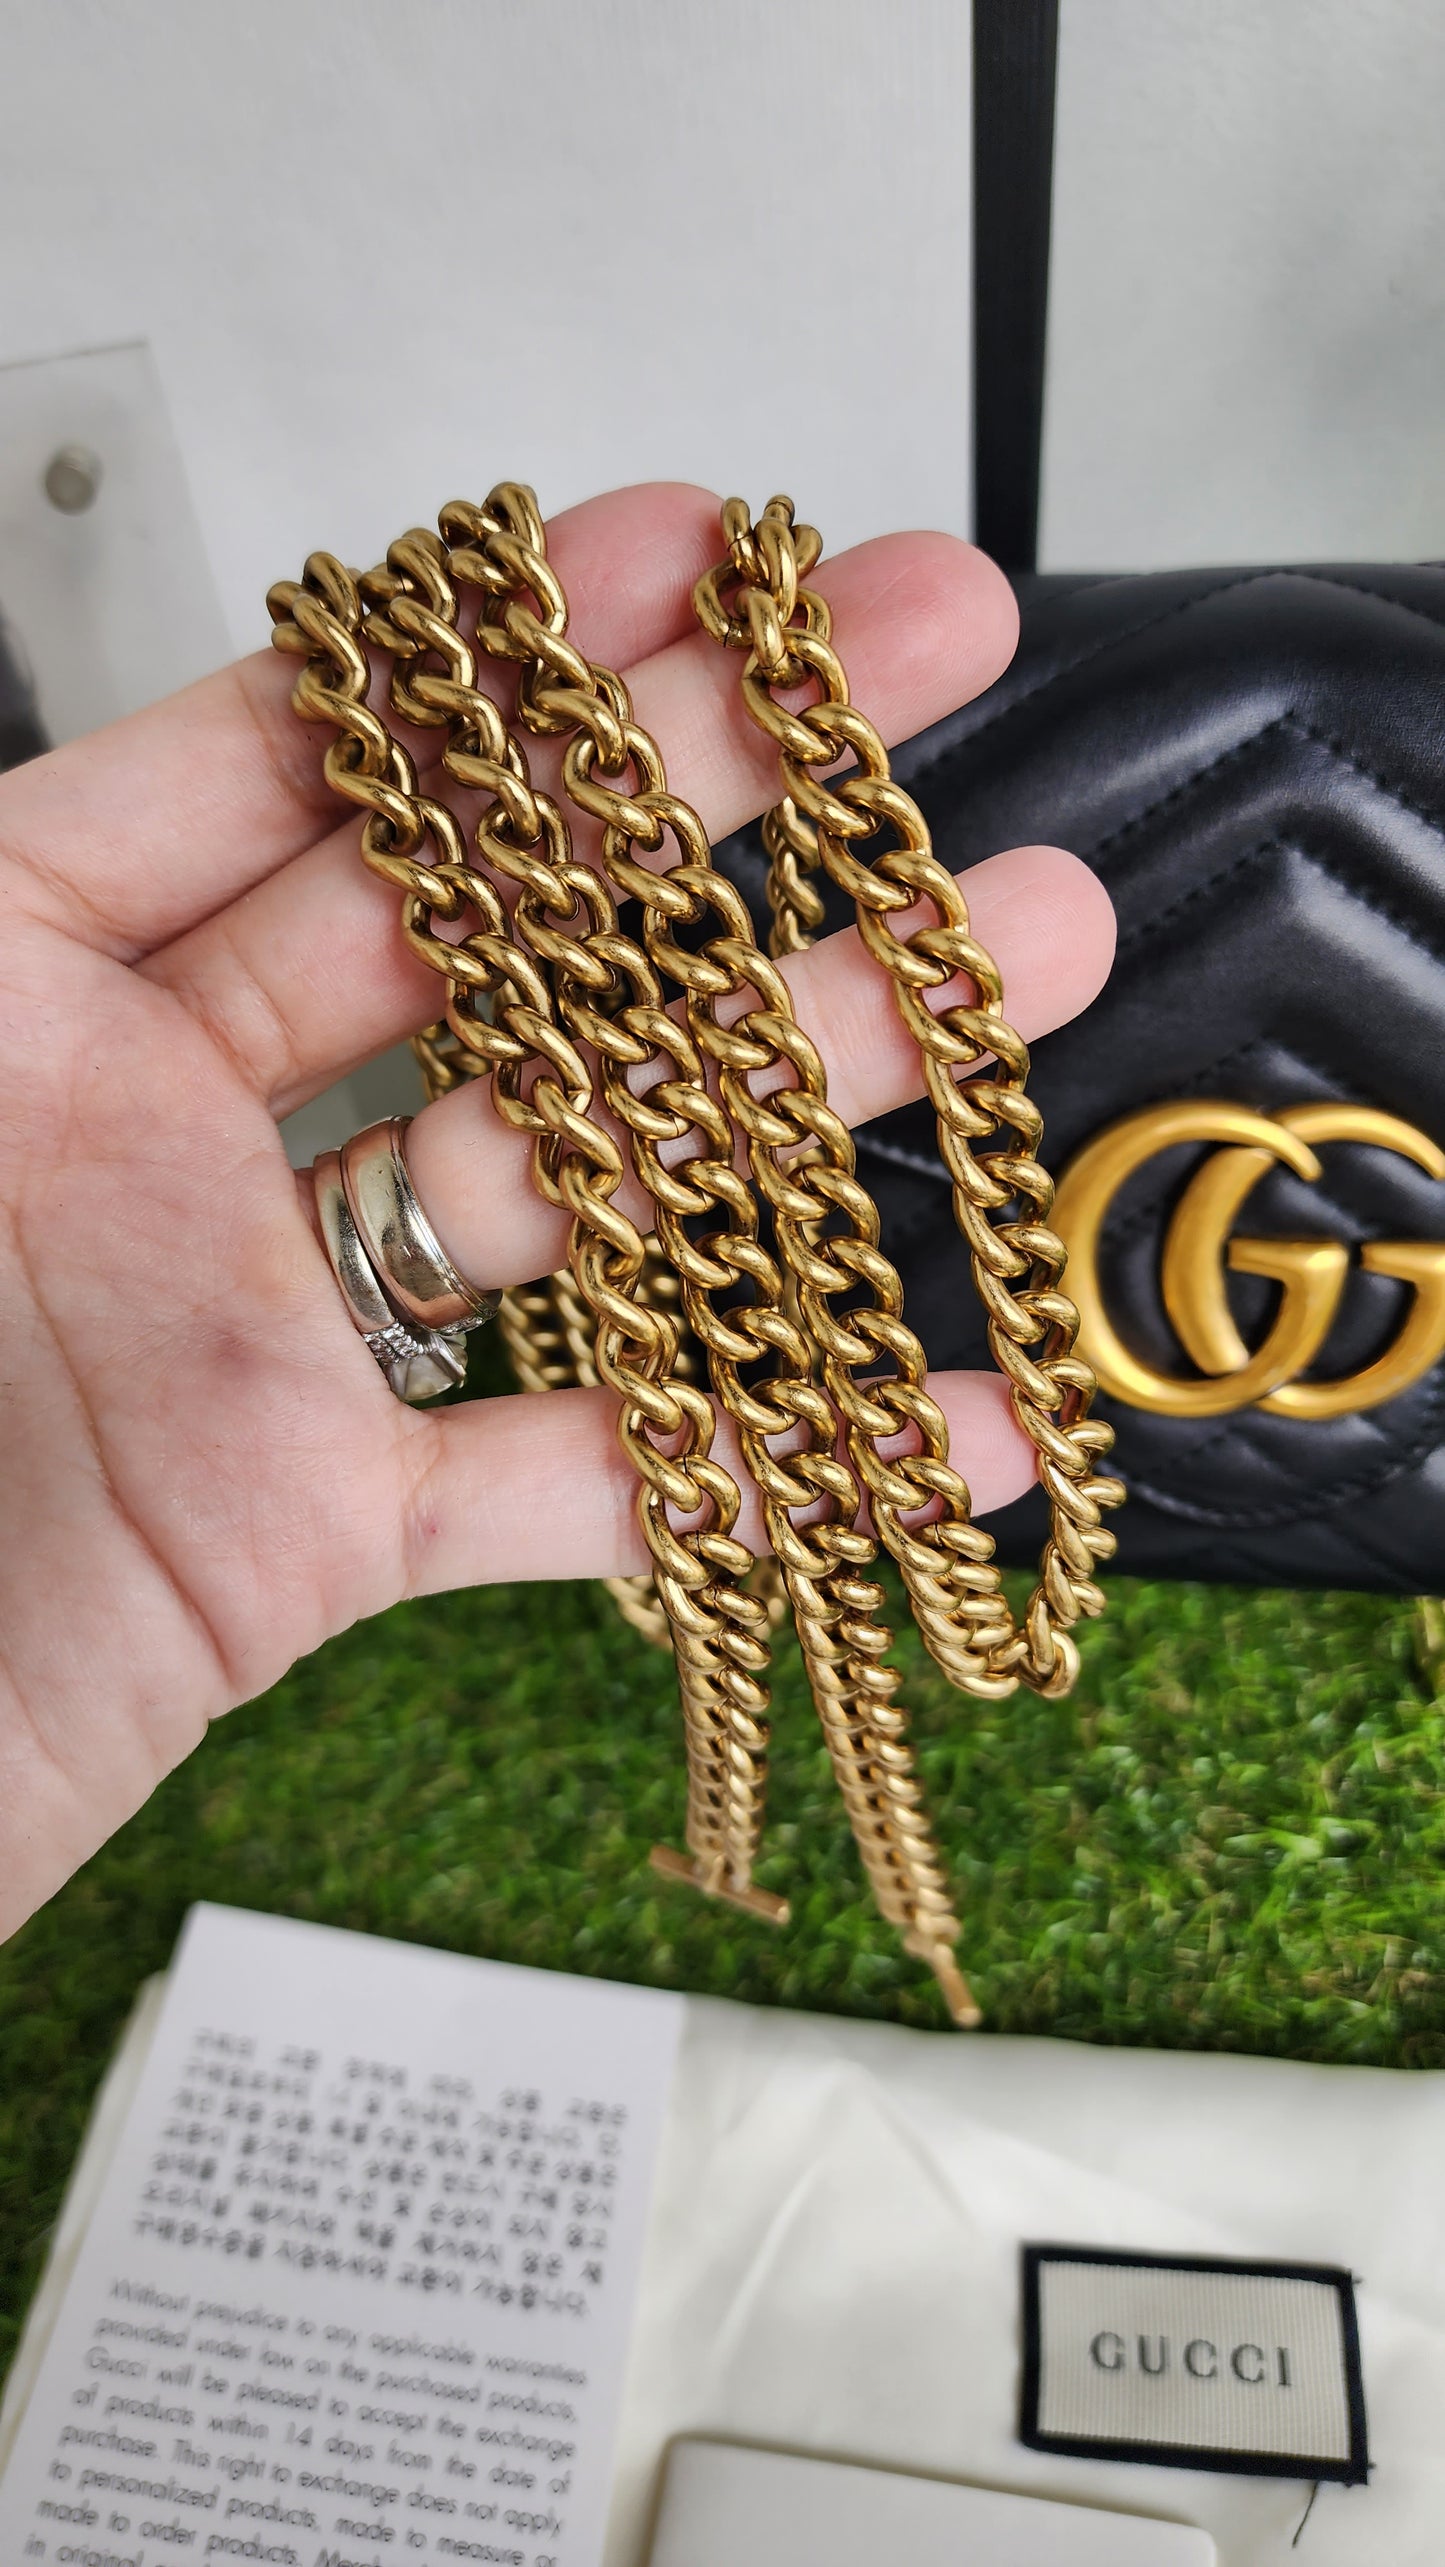 GUCCI MARMONT WOC